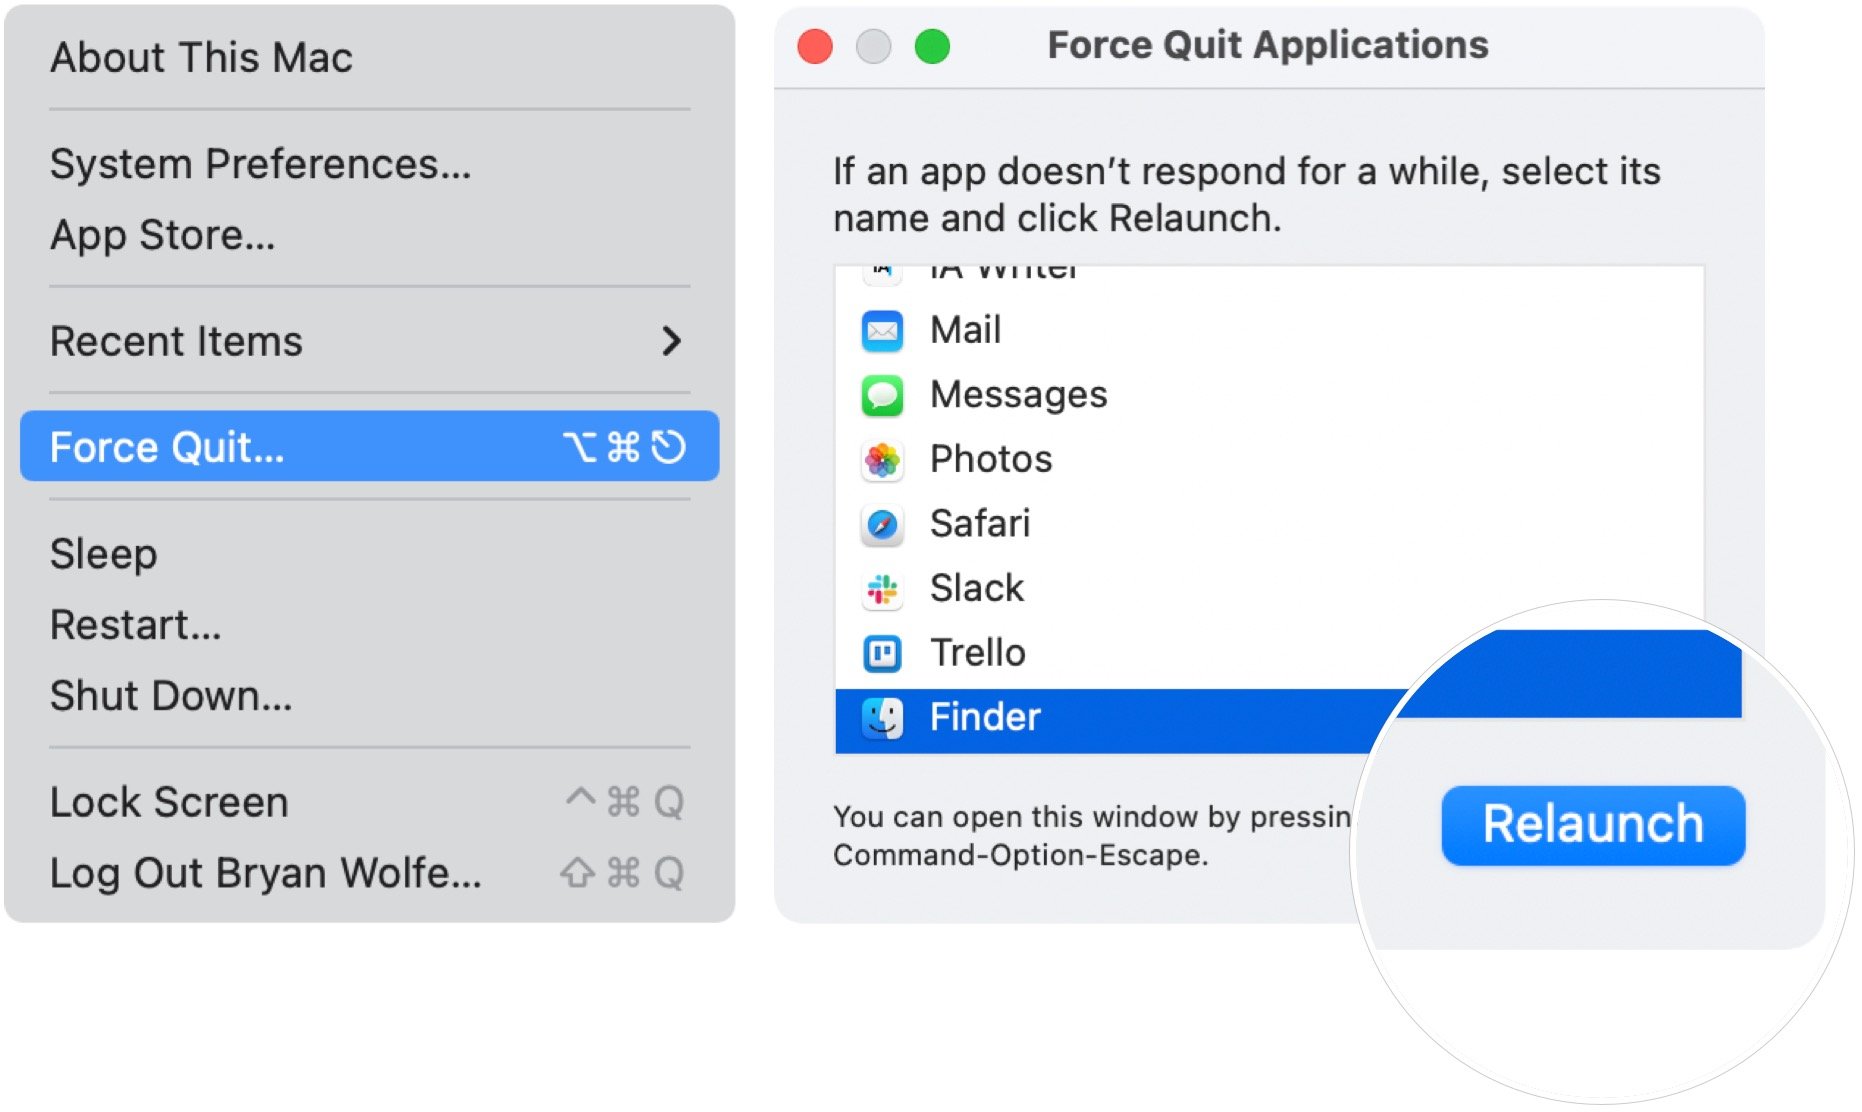 To unfreeze Finder, choose the Apple menu in the top left corner of your screen. Choose Force Quit, then select Finder. Click Relaunch.